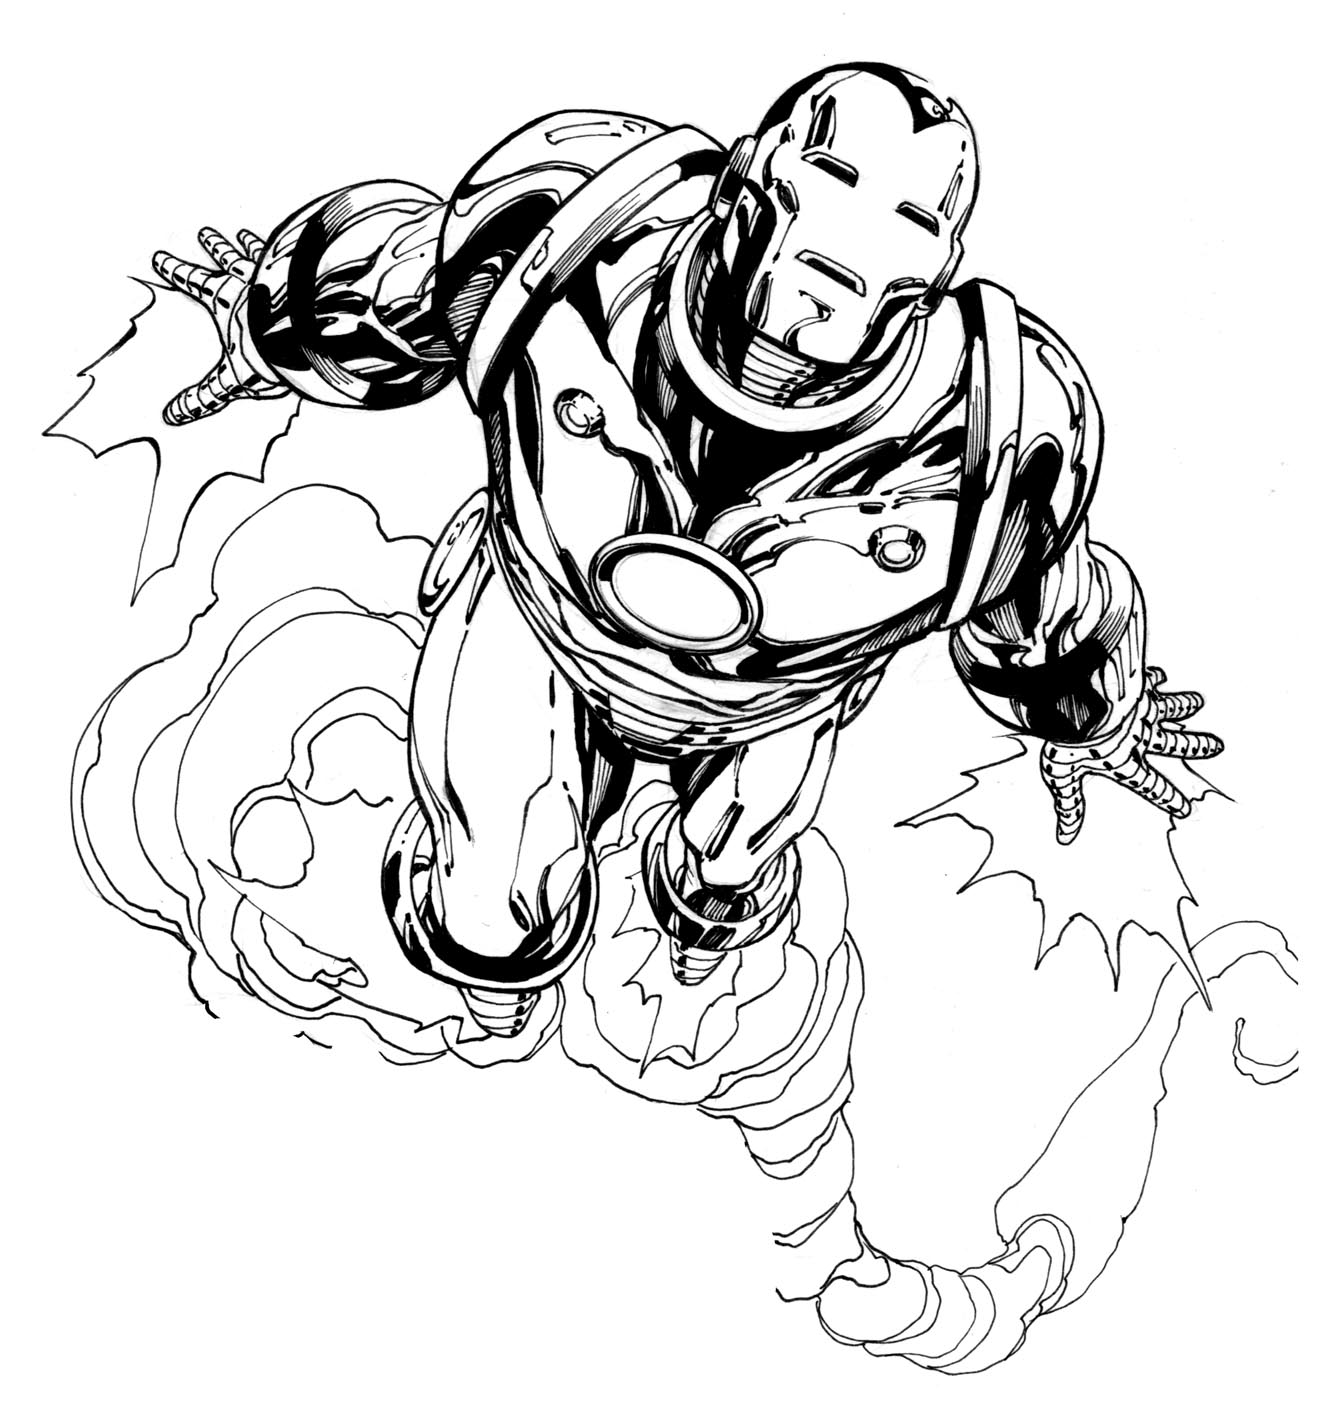  Iron Man Coloring pages | Coloring page for kids | #24